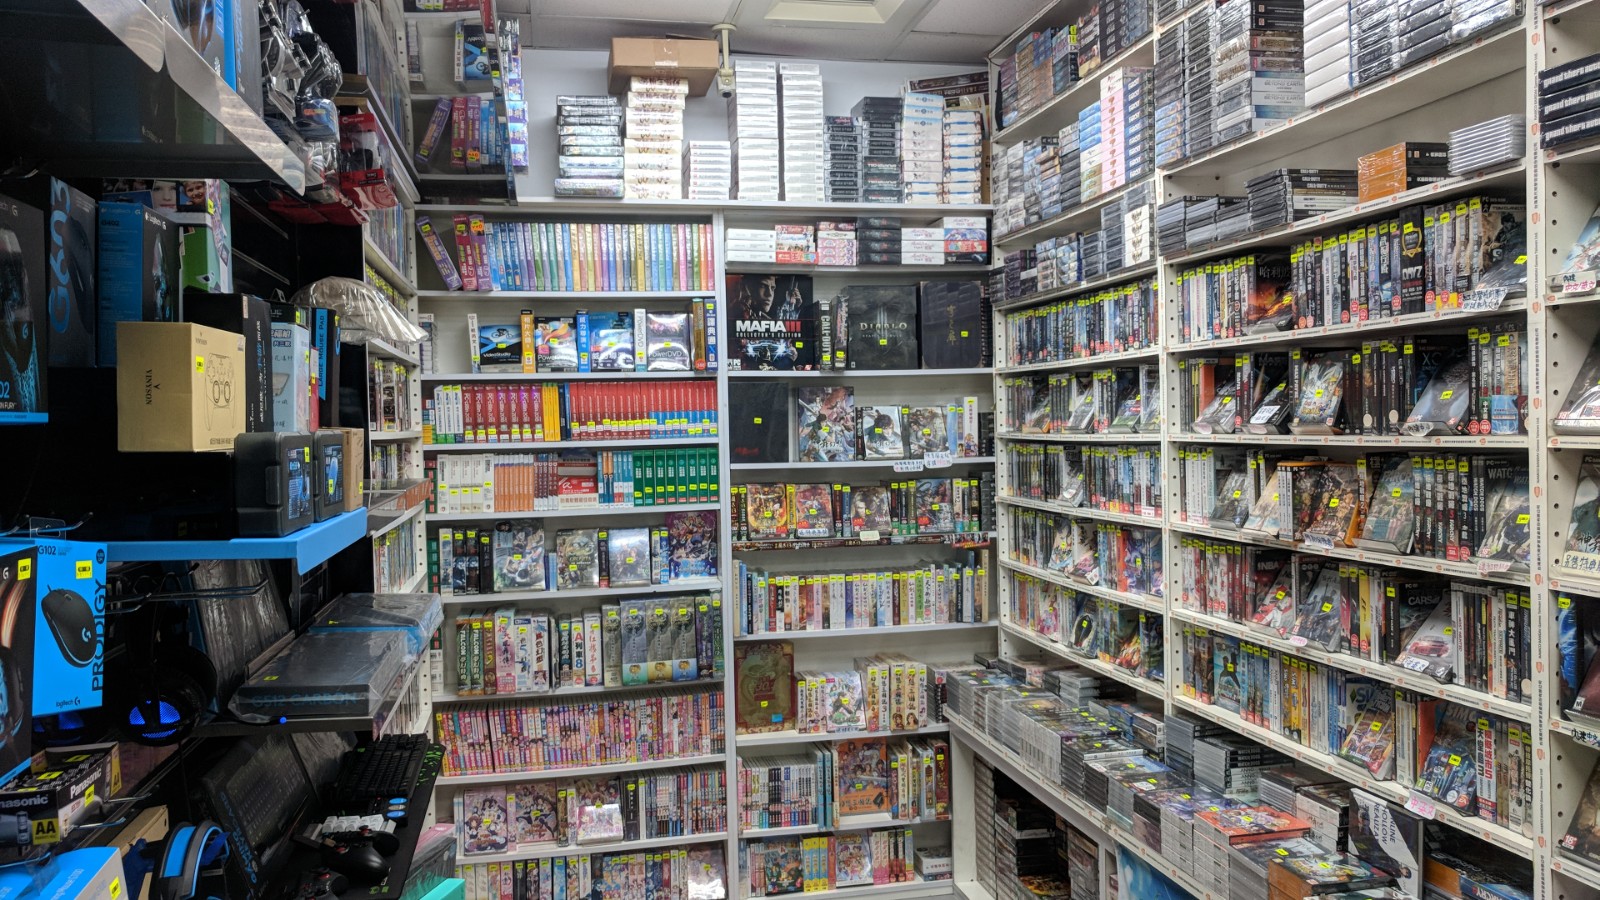 pc game store near me